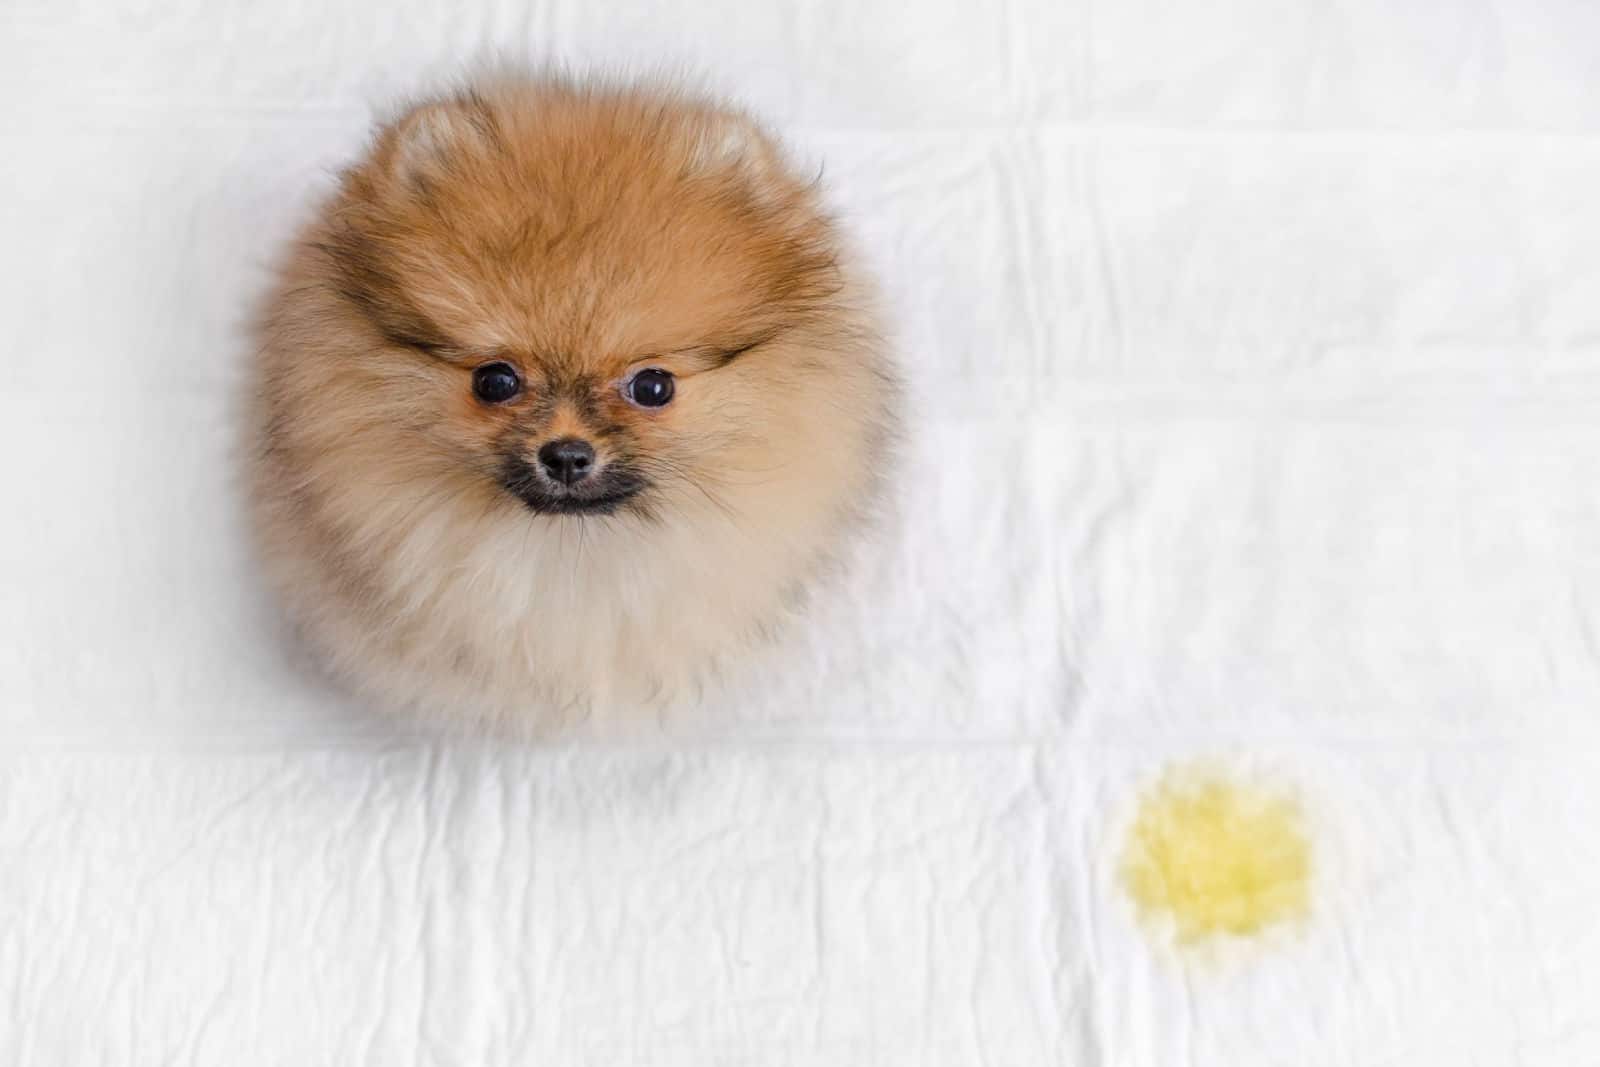 fluffy pomeranian puppy and urine puddle